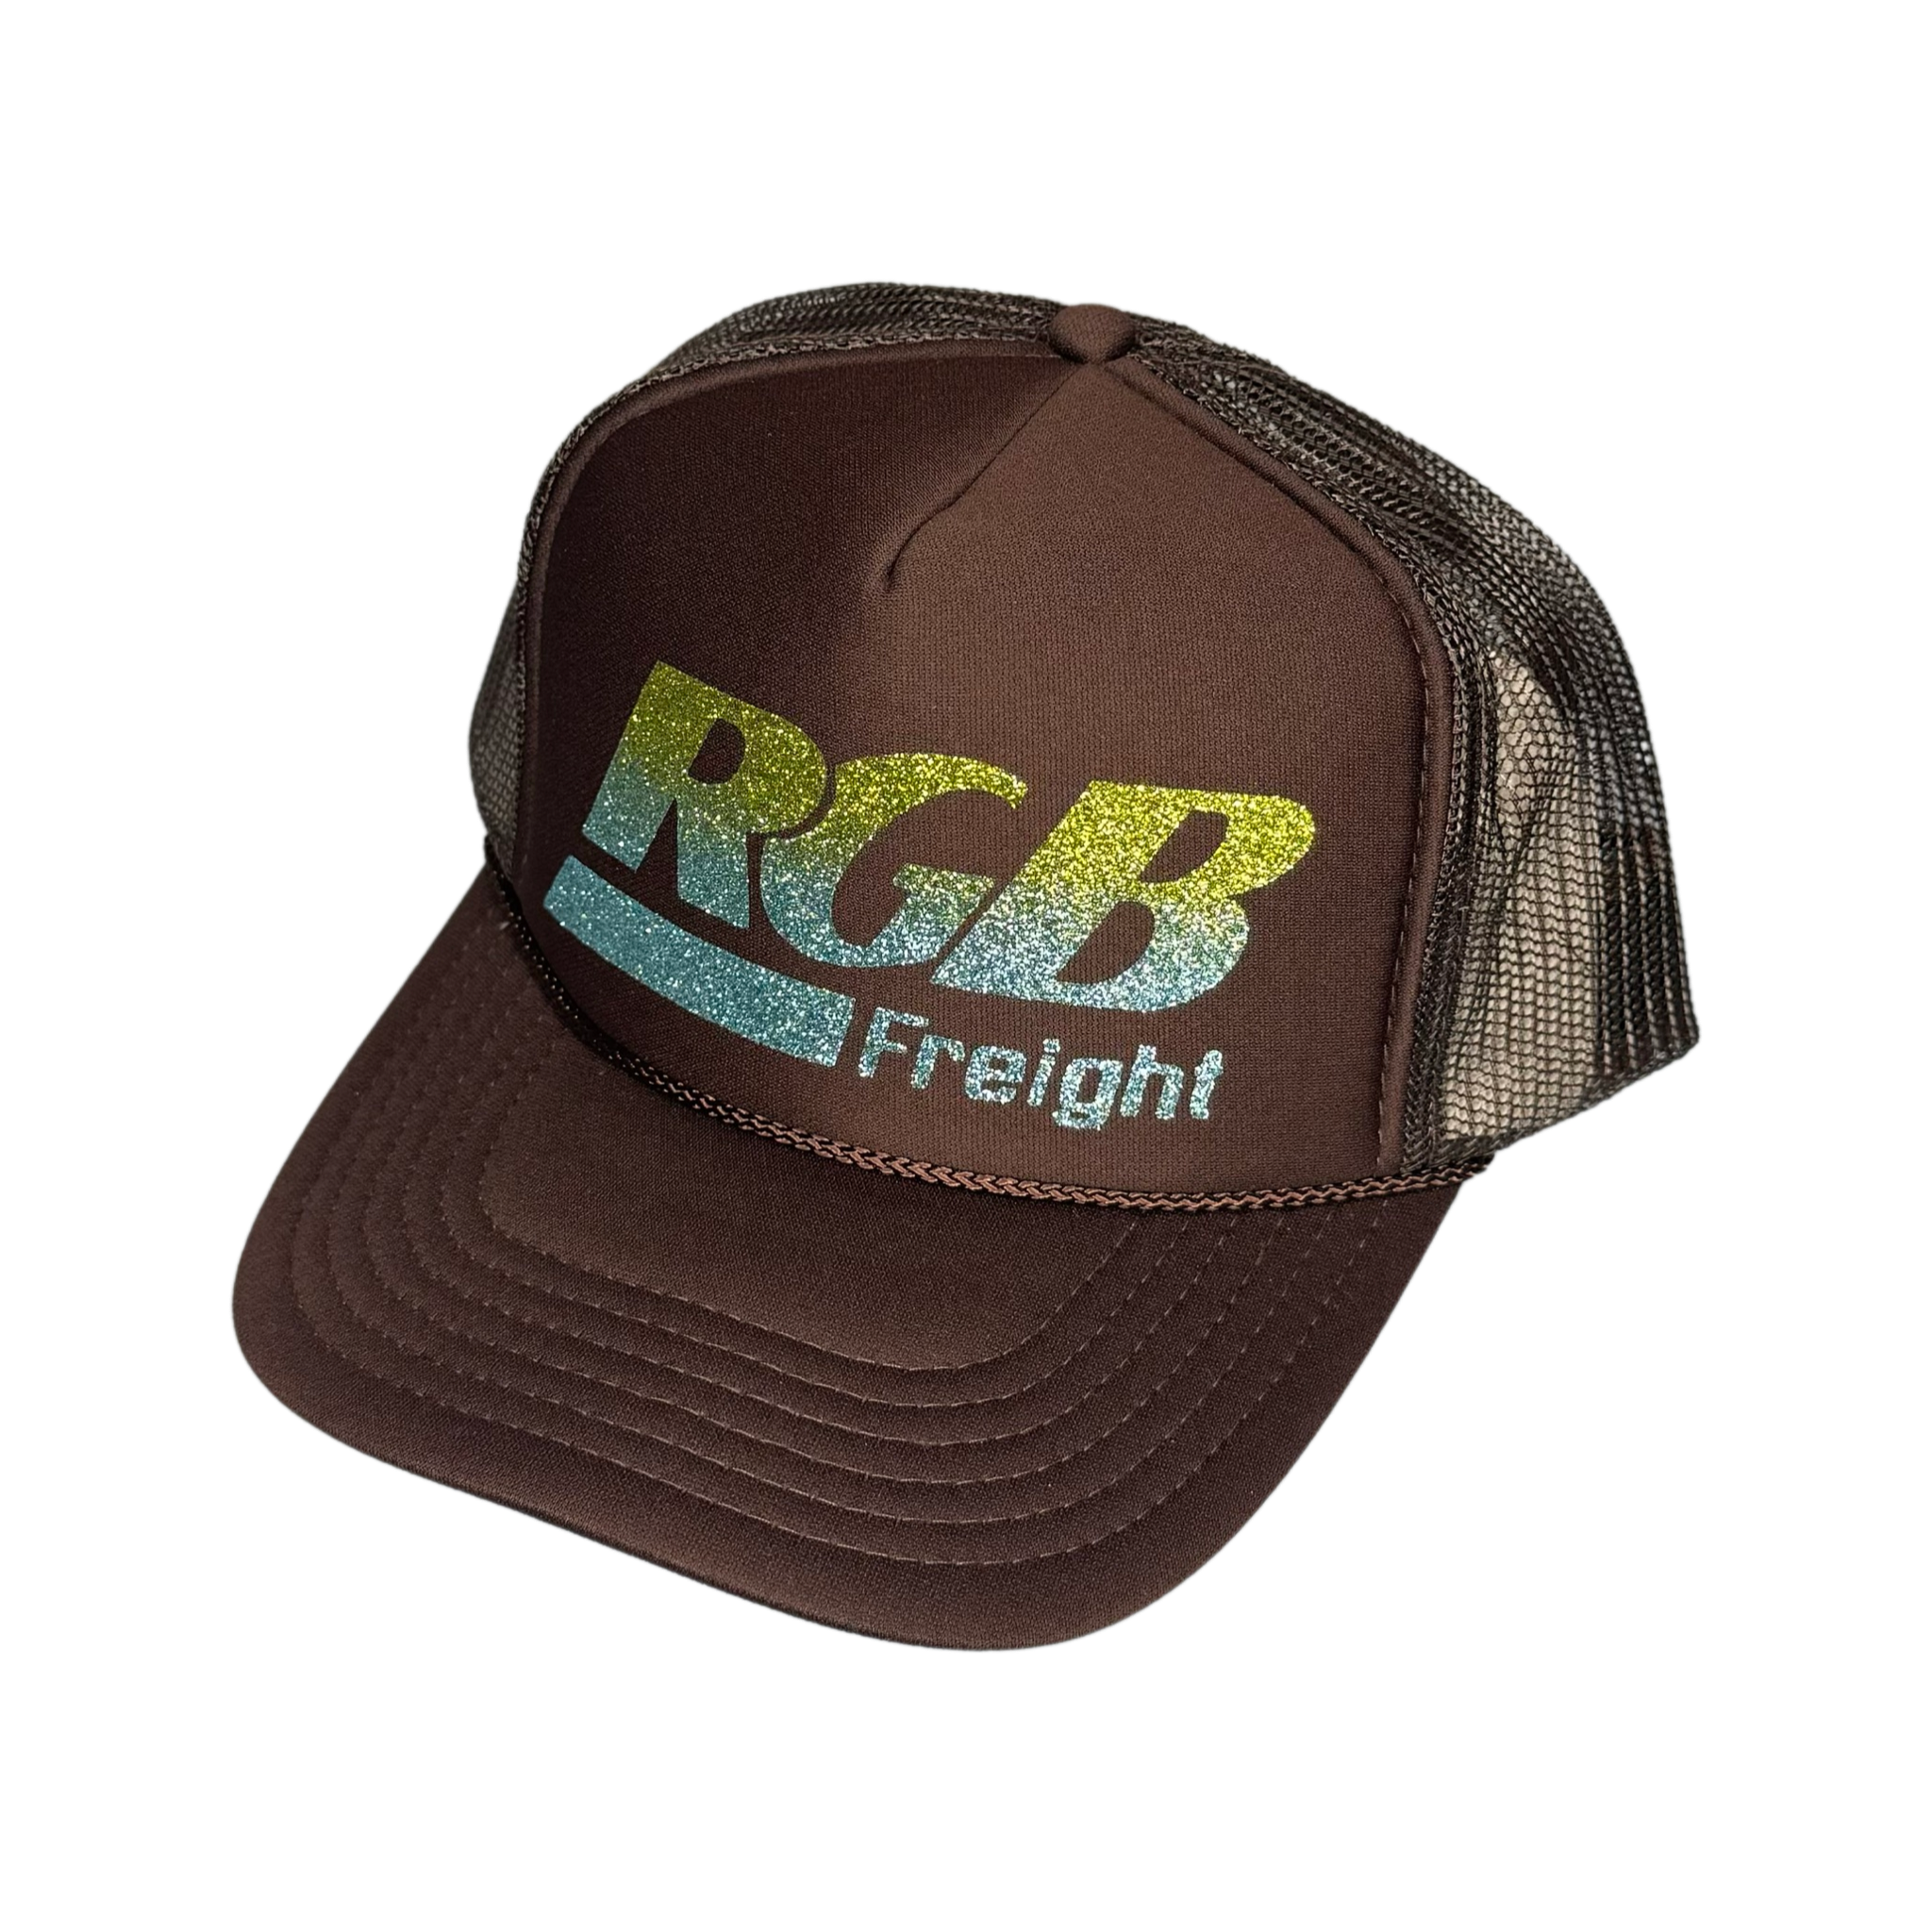 RGB FREIGHT TRUCKER HAT - “ICEE COLORS”